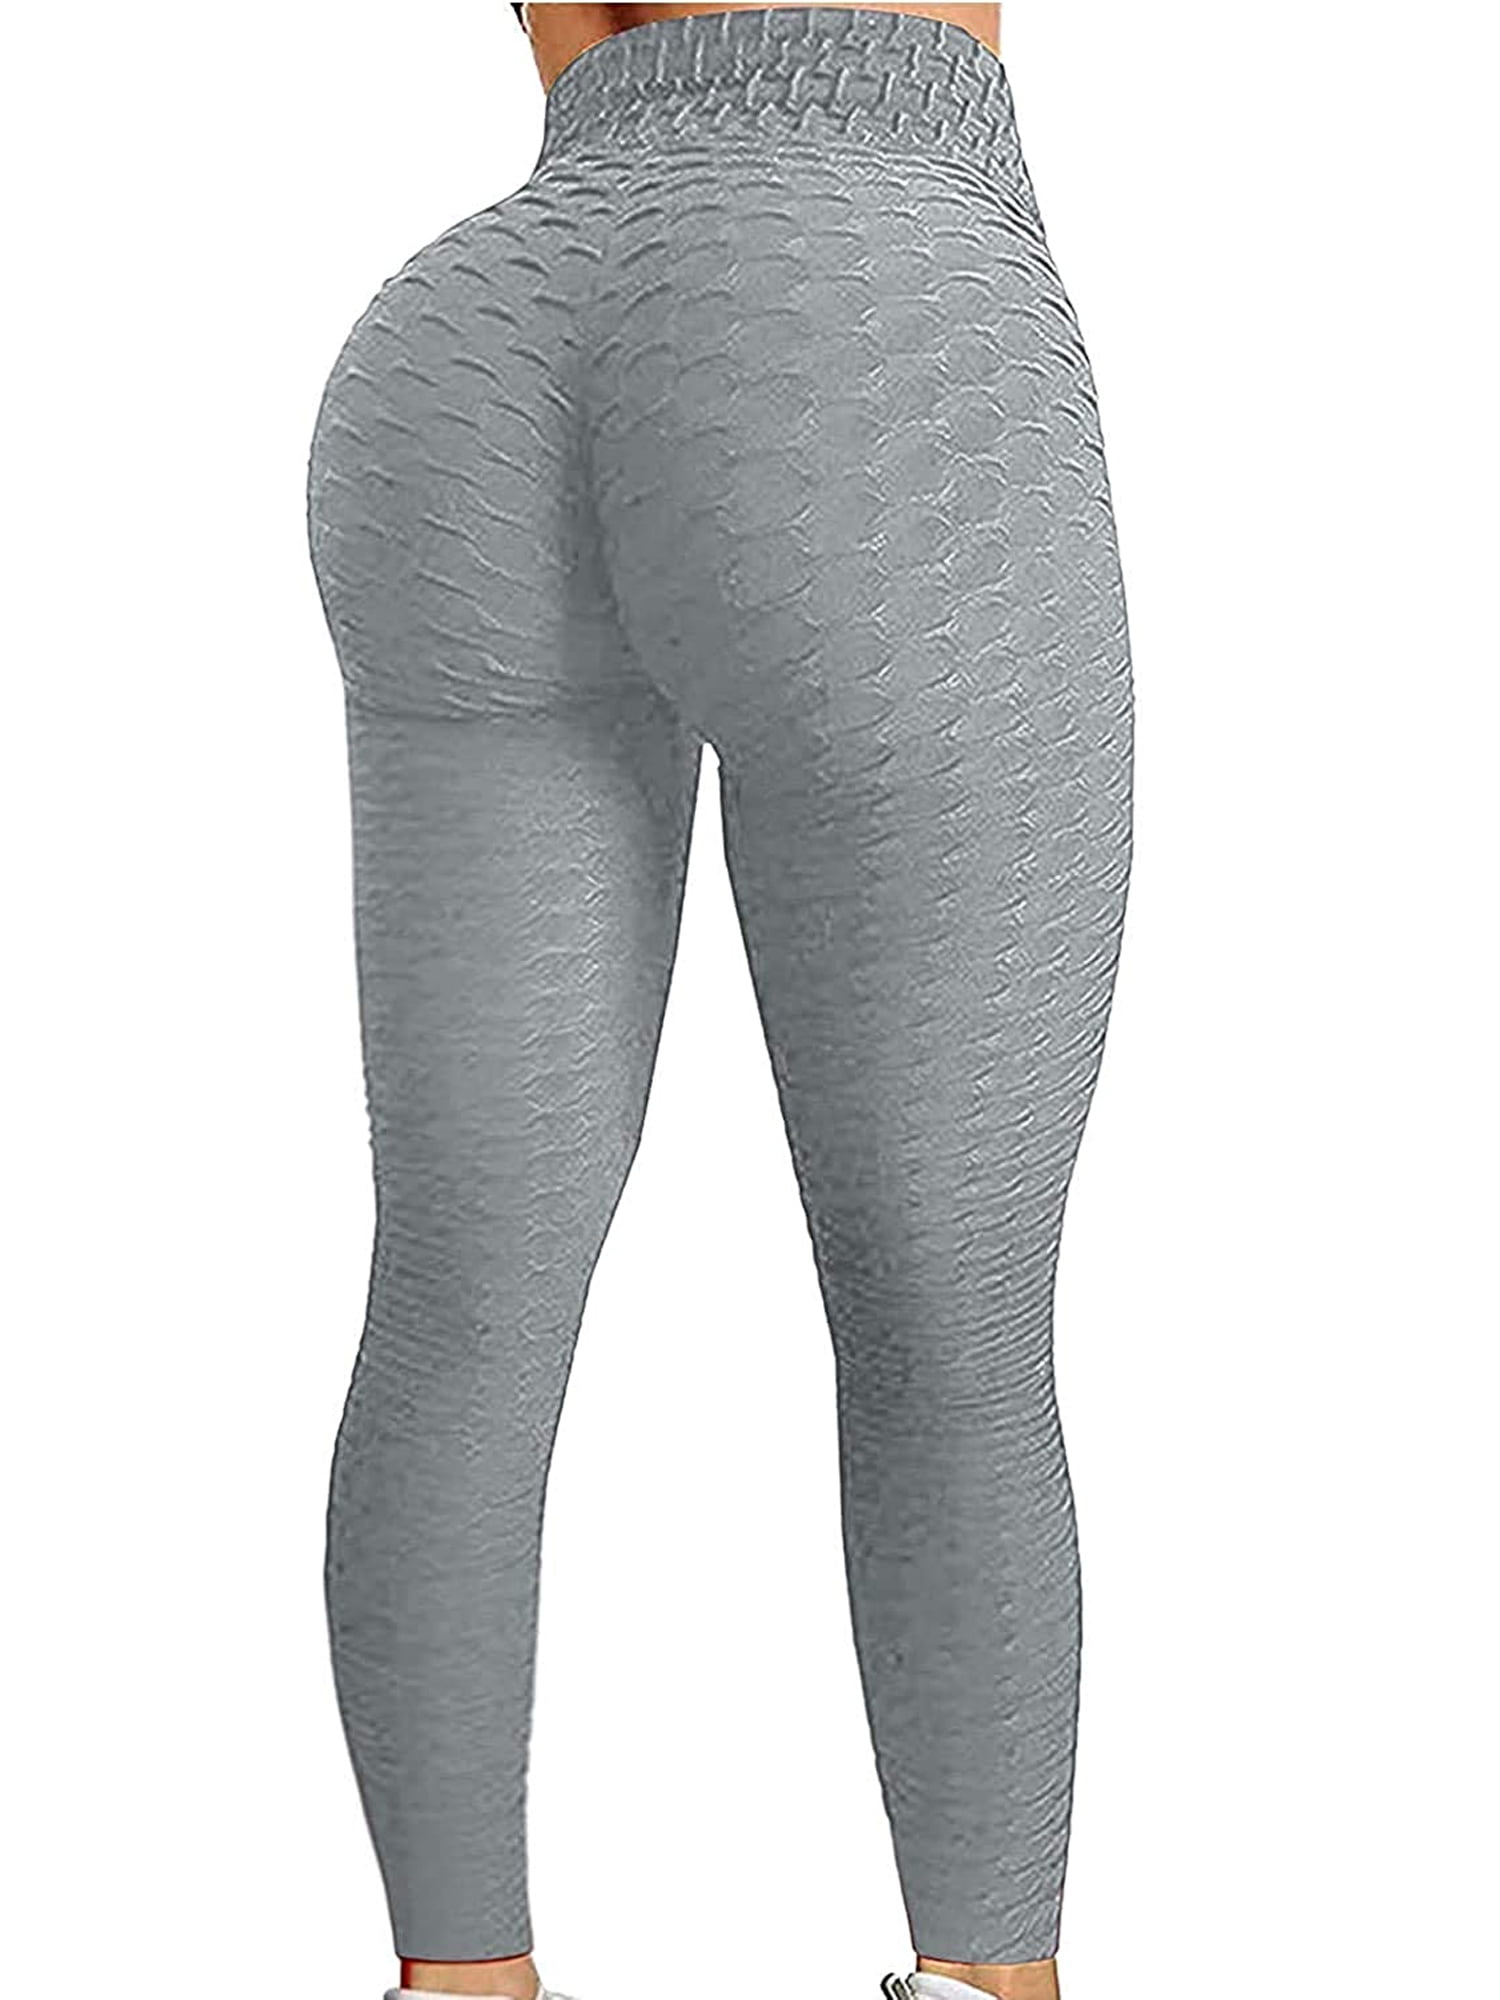 Canrulo Women Booty Legging Yoga Pants Bubble Butt Lifting Workout Tights  Grey XL 